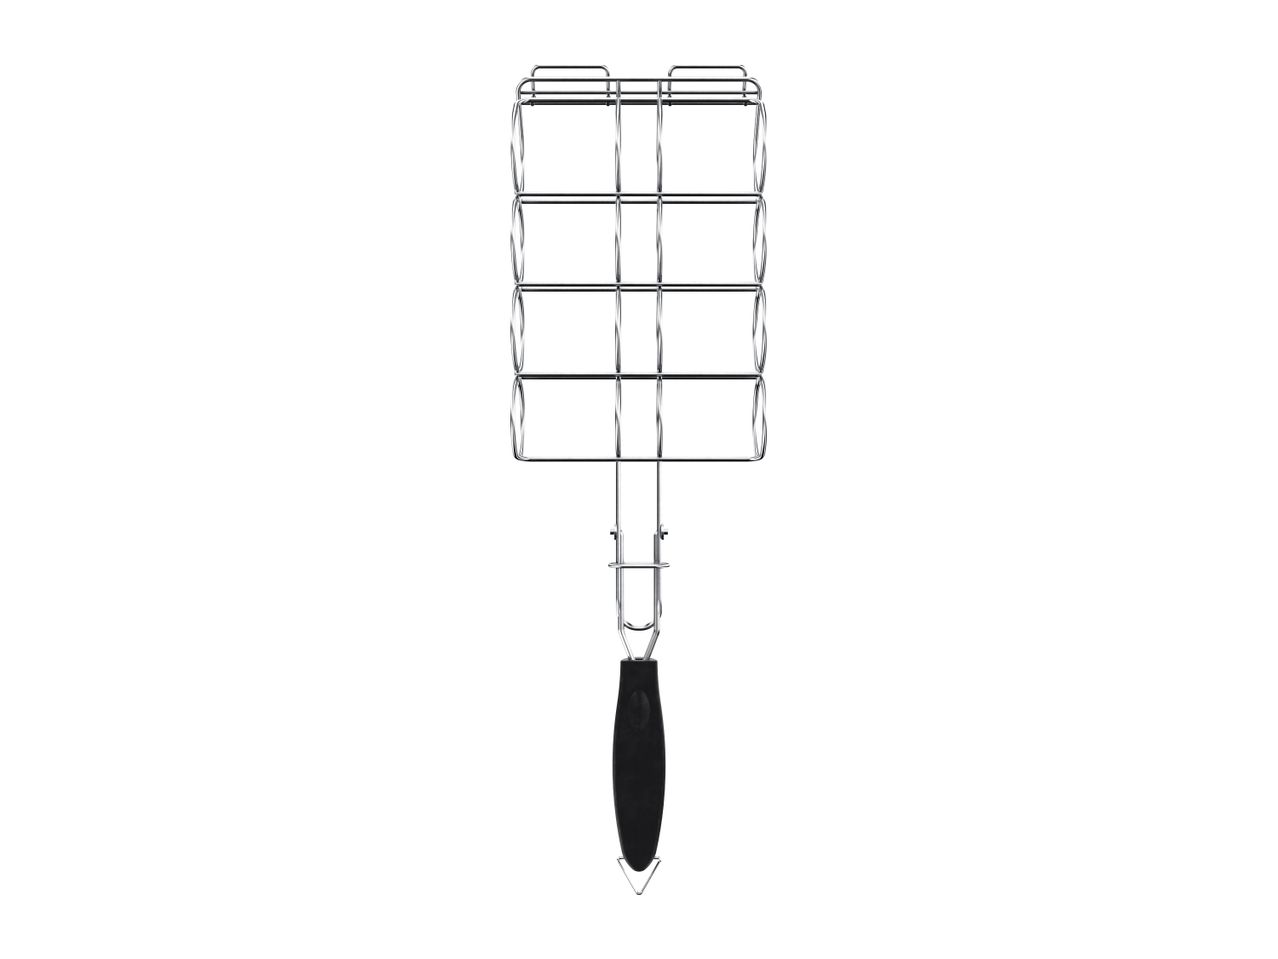 Go to full screen view: Grillmeister BBQ Basket - Image 6